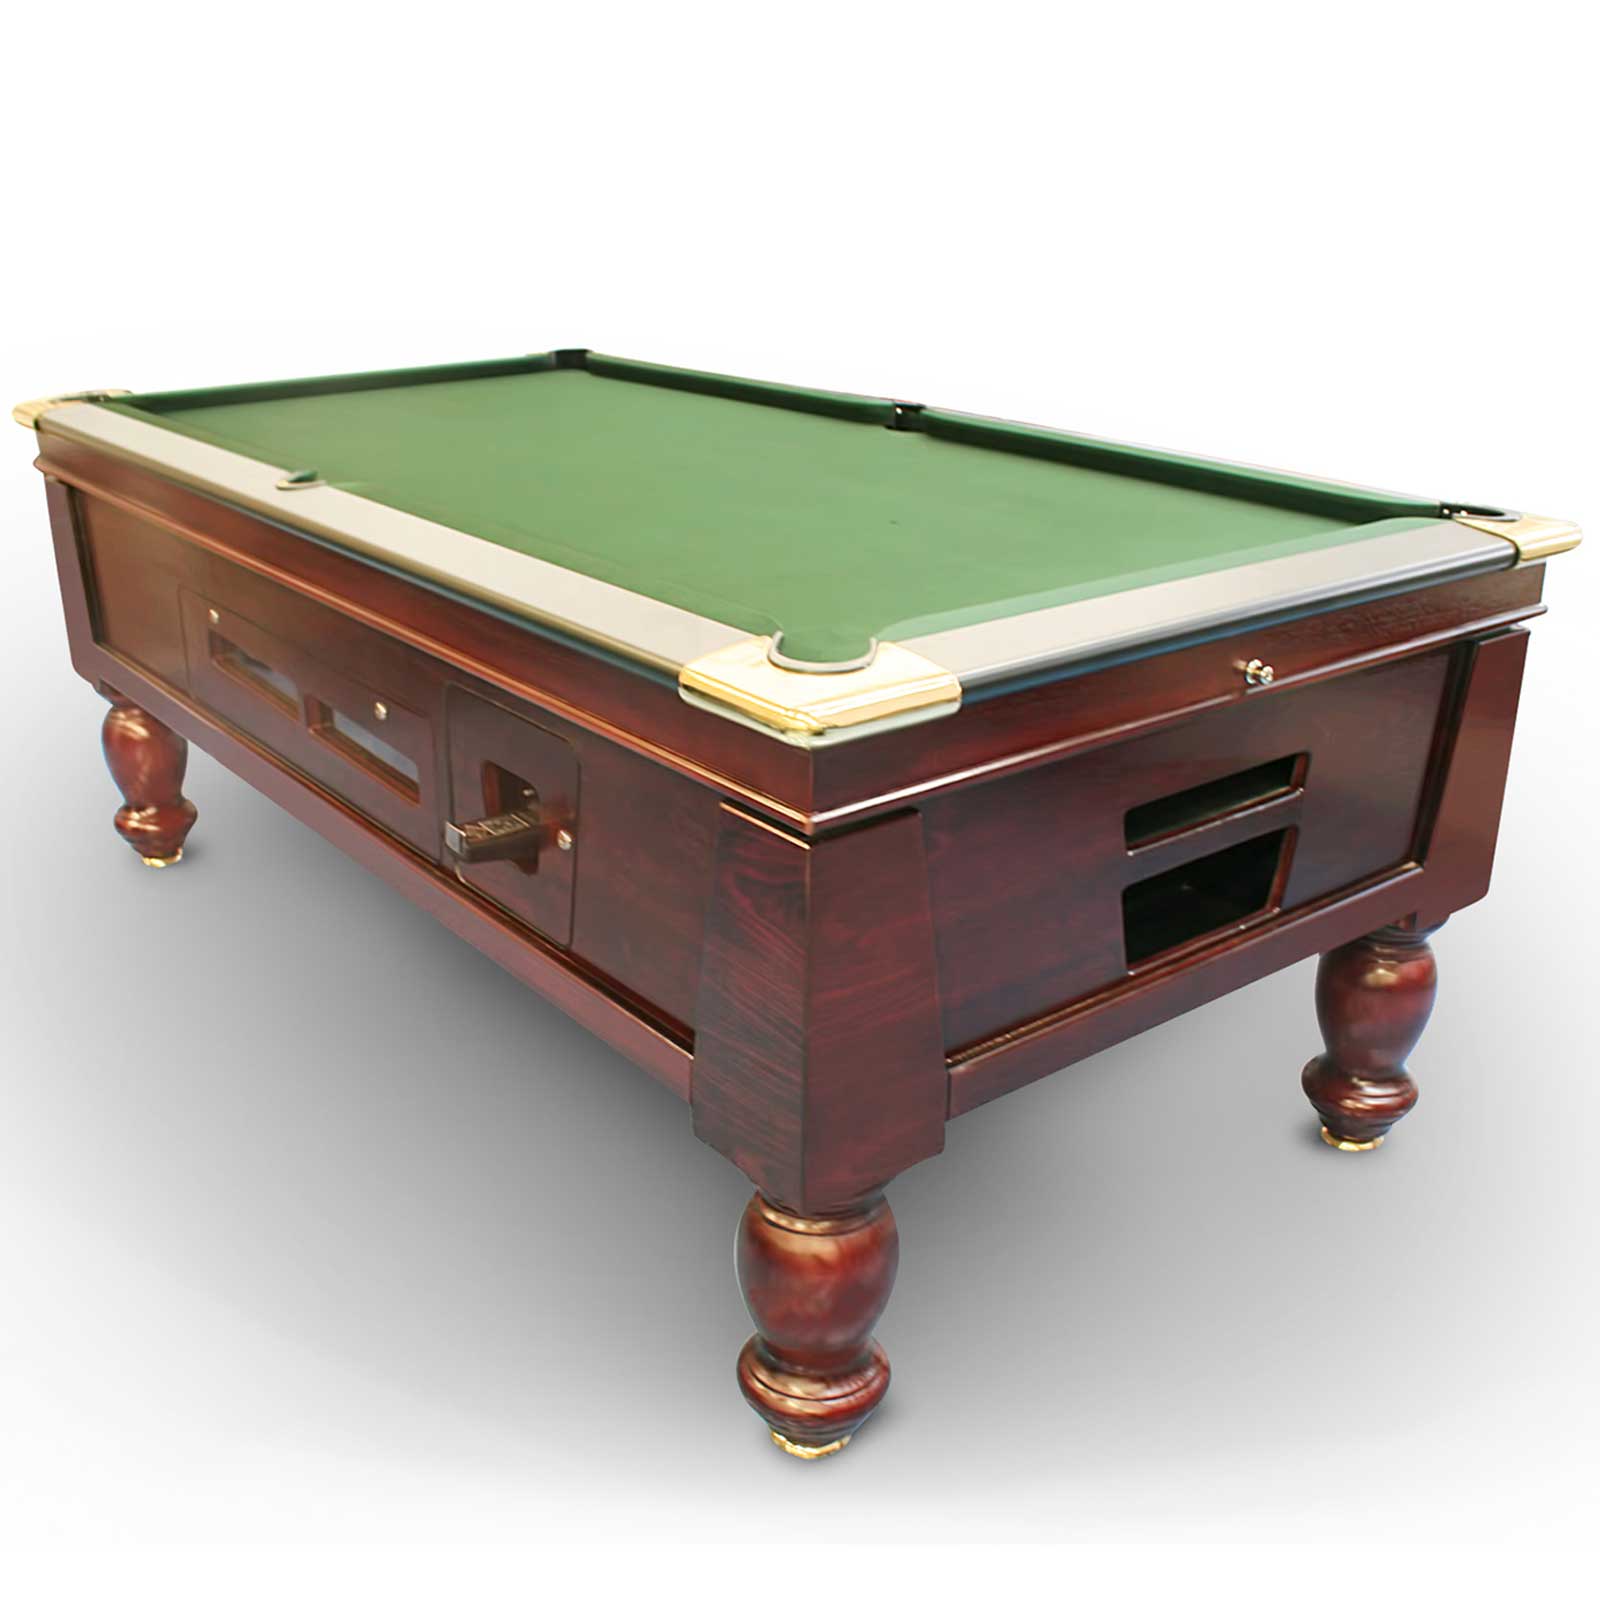 8 Foot Slate Electronic Coin Operated, How Much Is A Used Slate Pool Table Worth